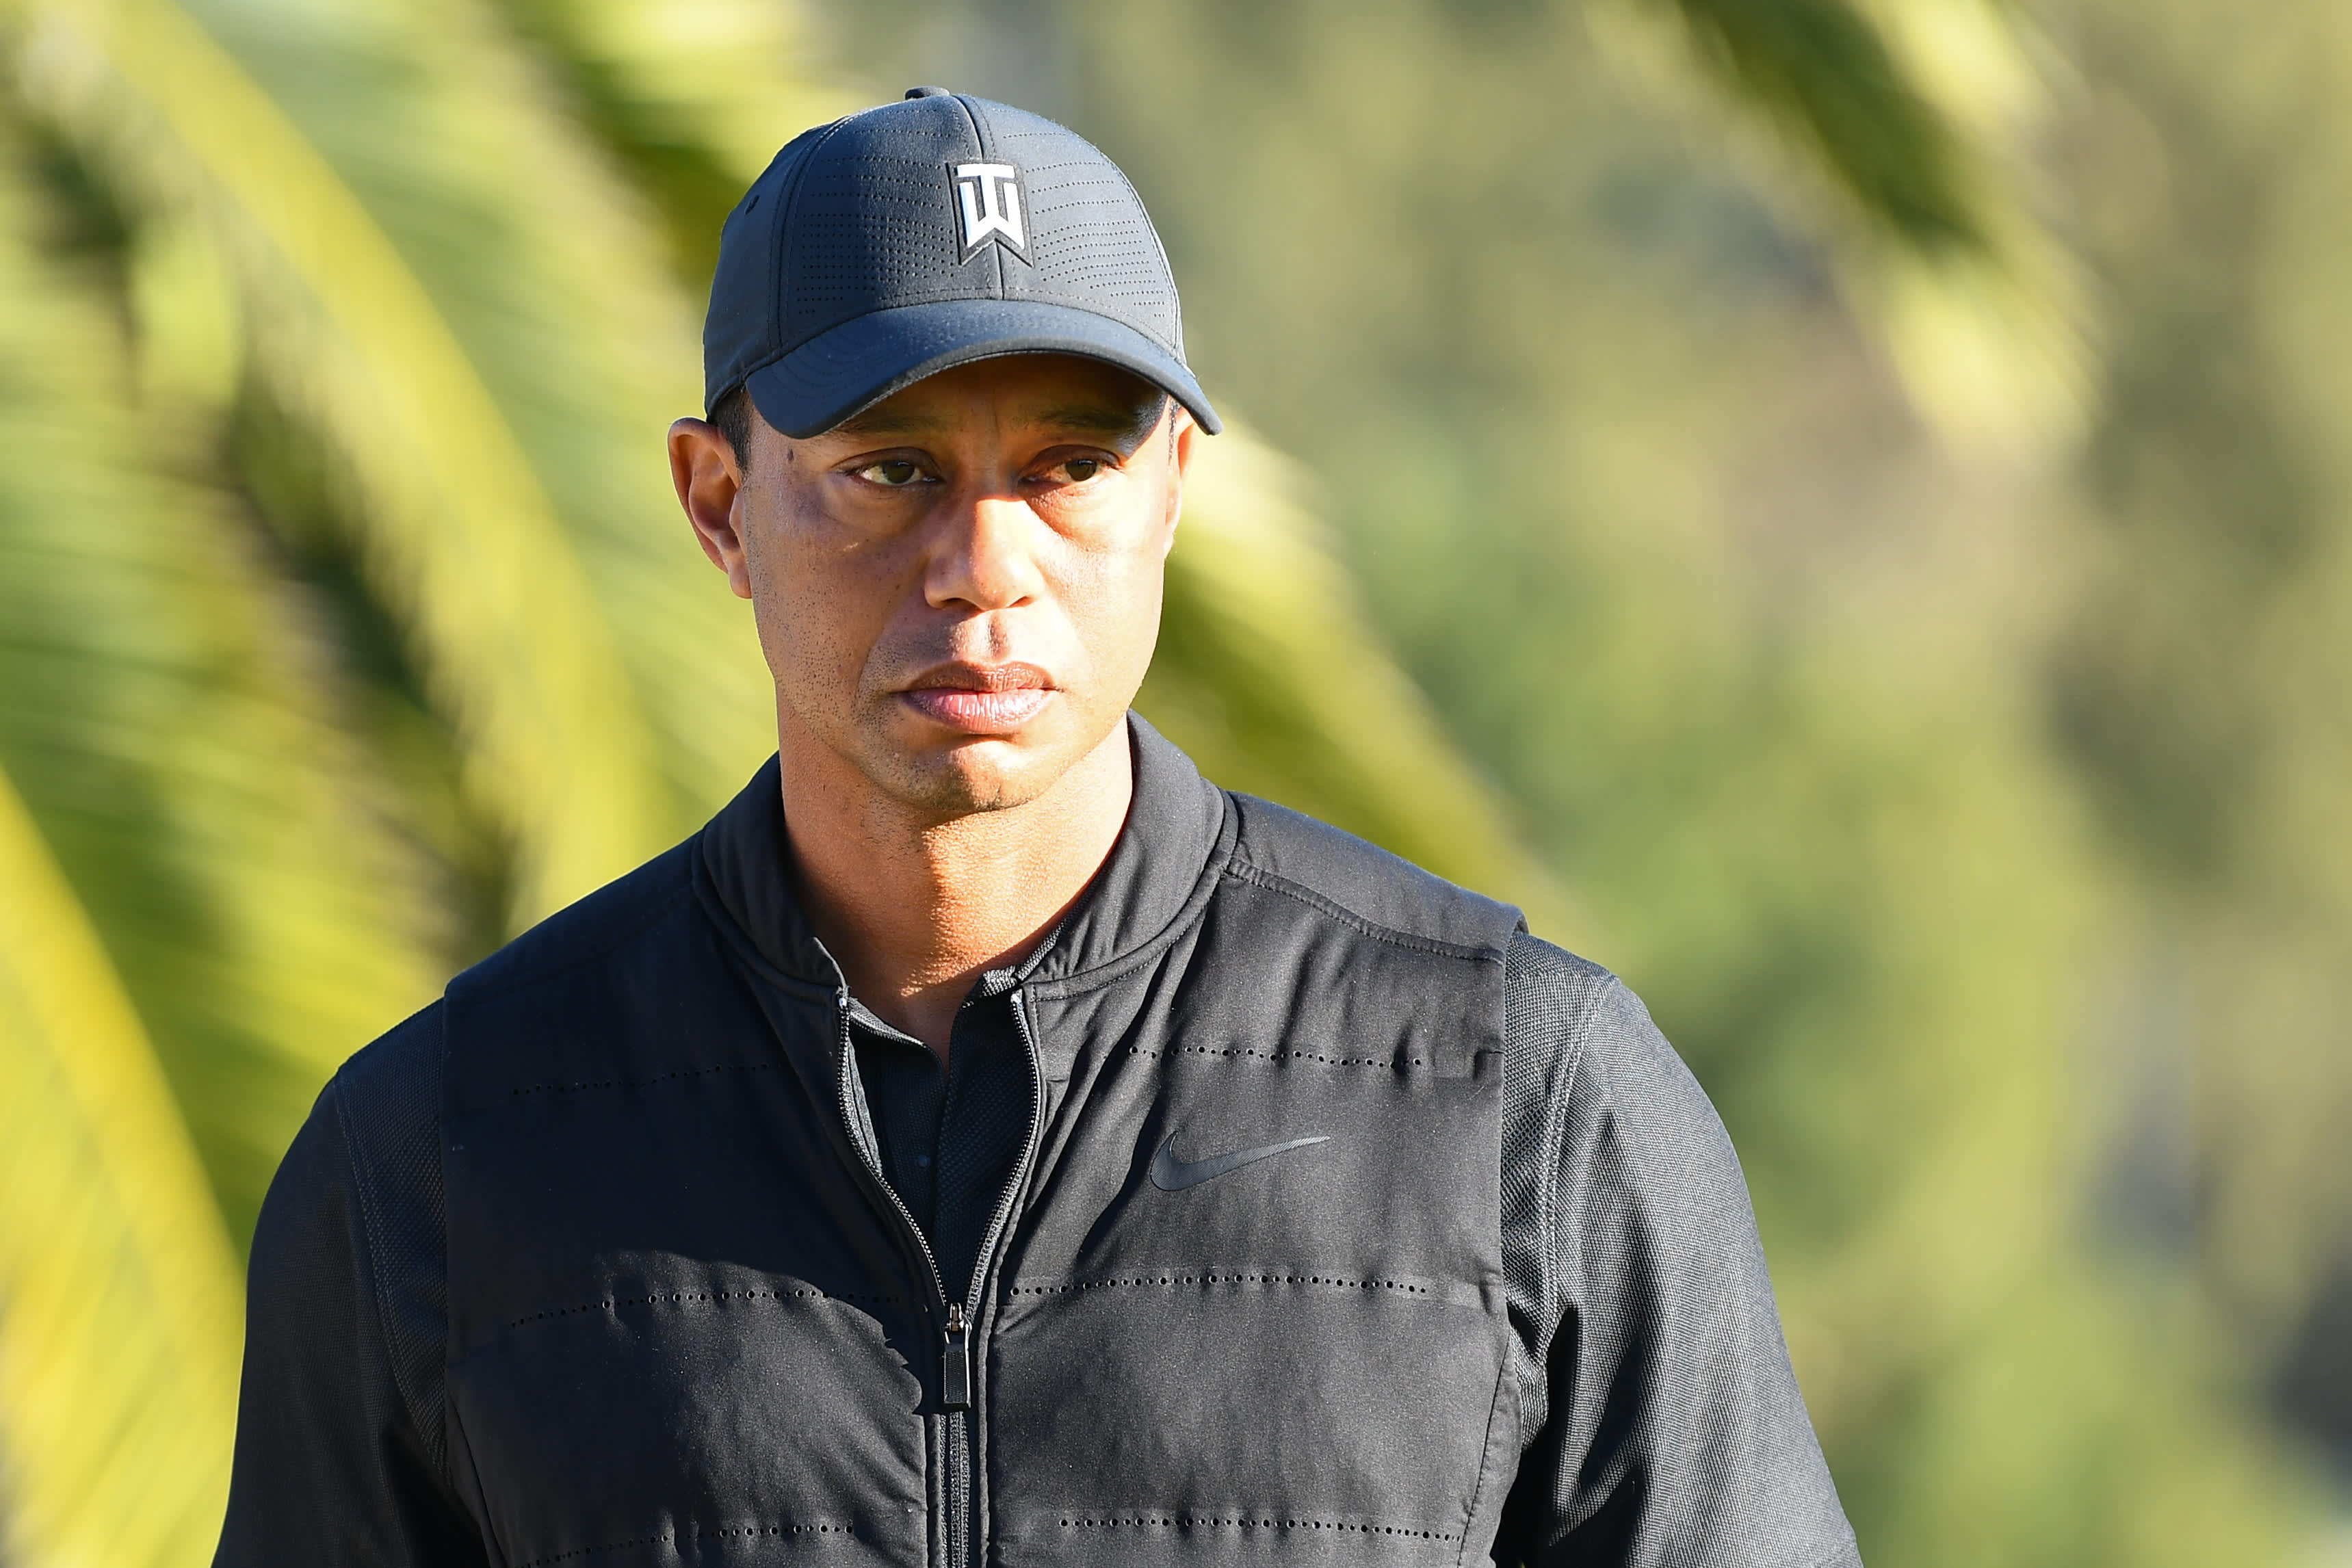 Tiger Woods’ injuries are “harder to heal,” says the surgeon